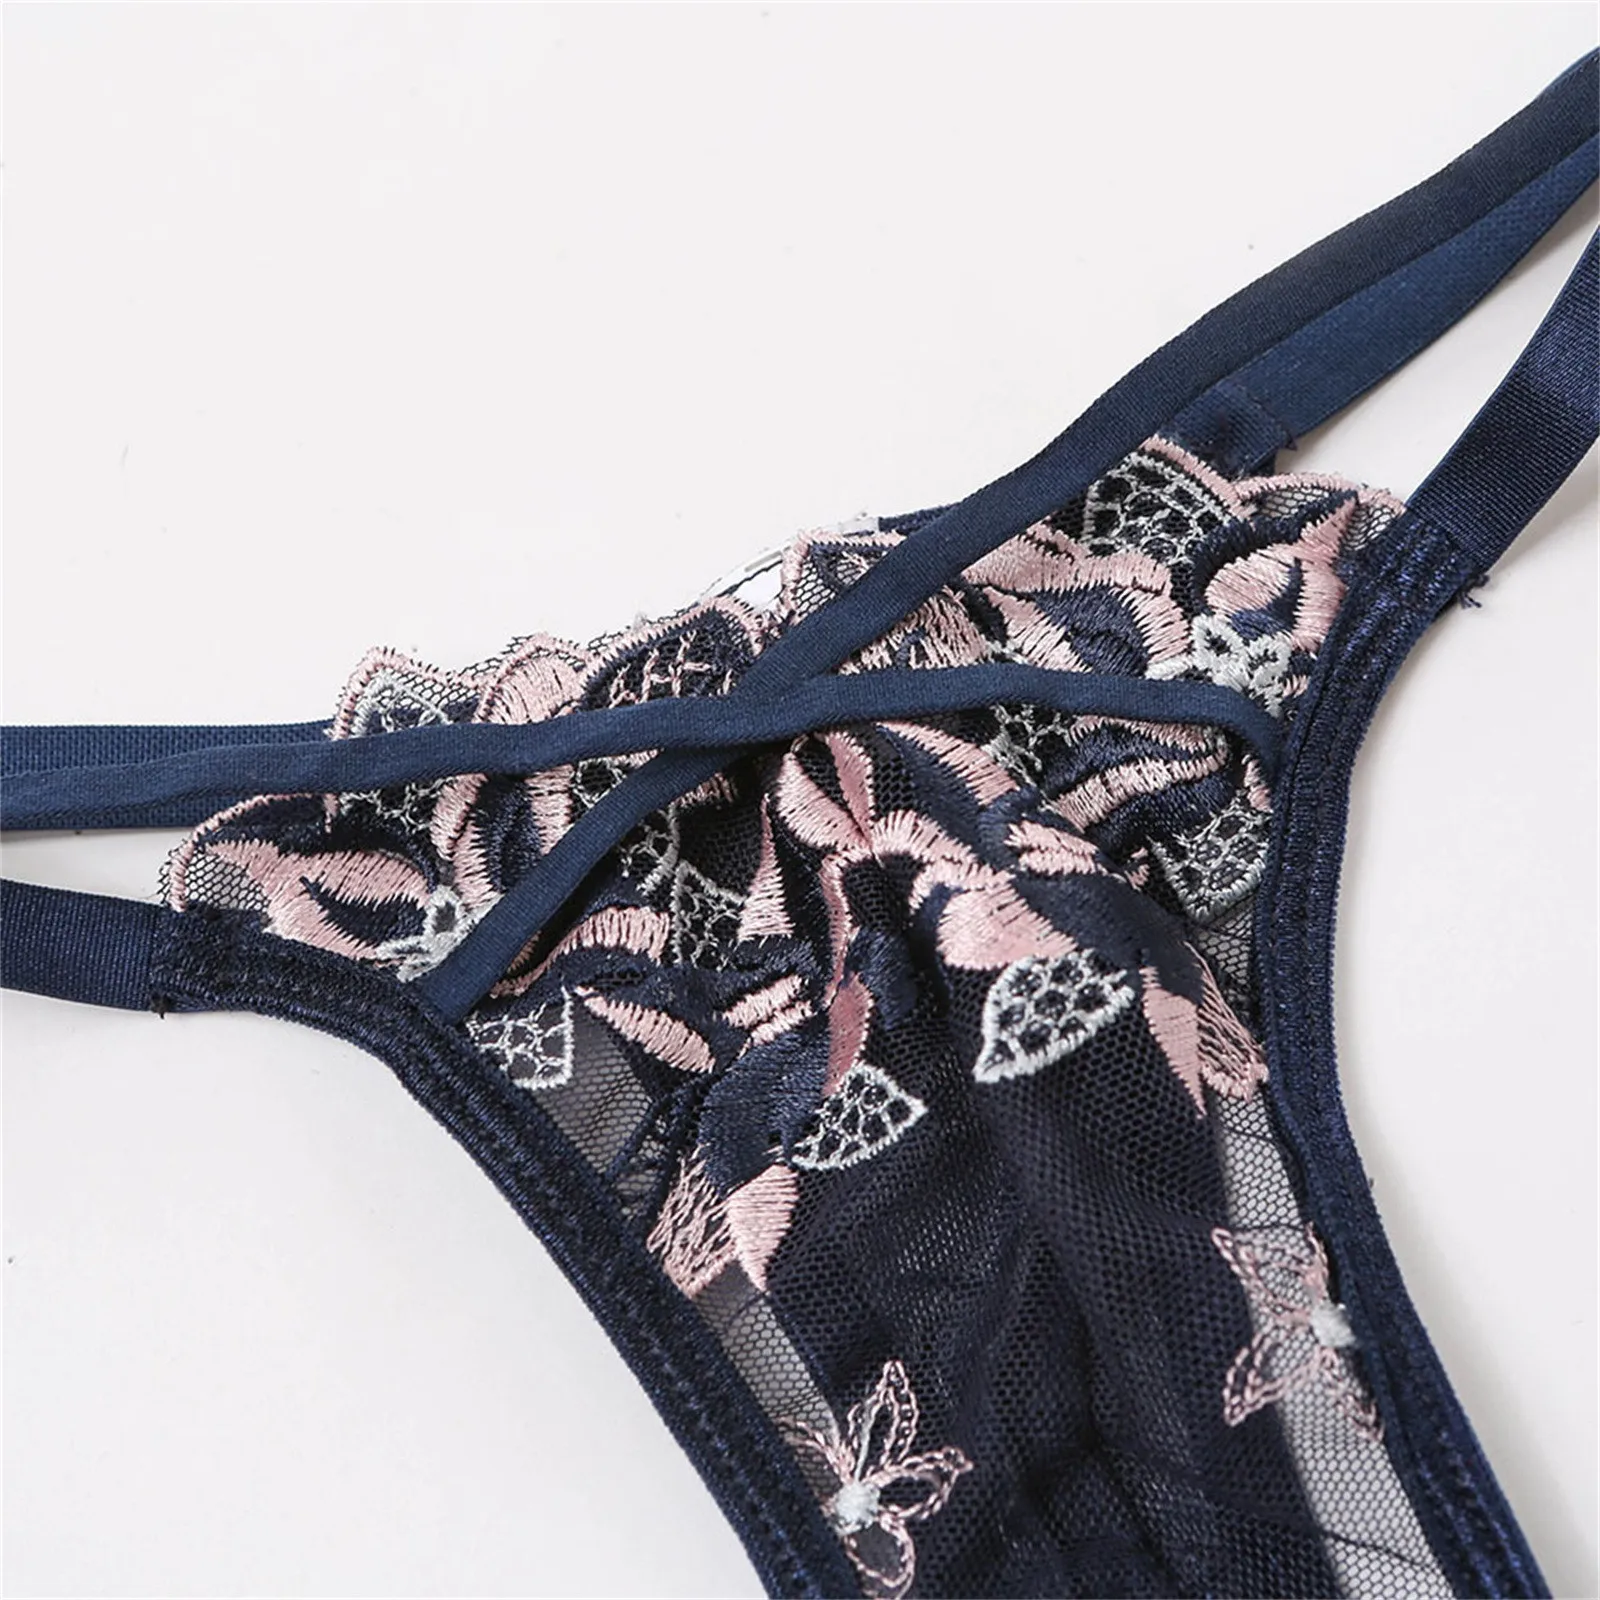 Floral Embroidery Lingerie Set Lace Sexy Sensual Transparent Push Up Underwear Set Corset Bra Brief Thongs Sex Intimate Pyjamas bra and brief sets